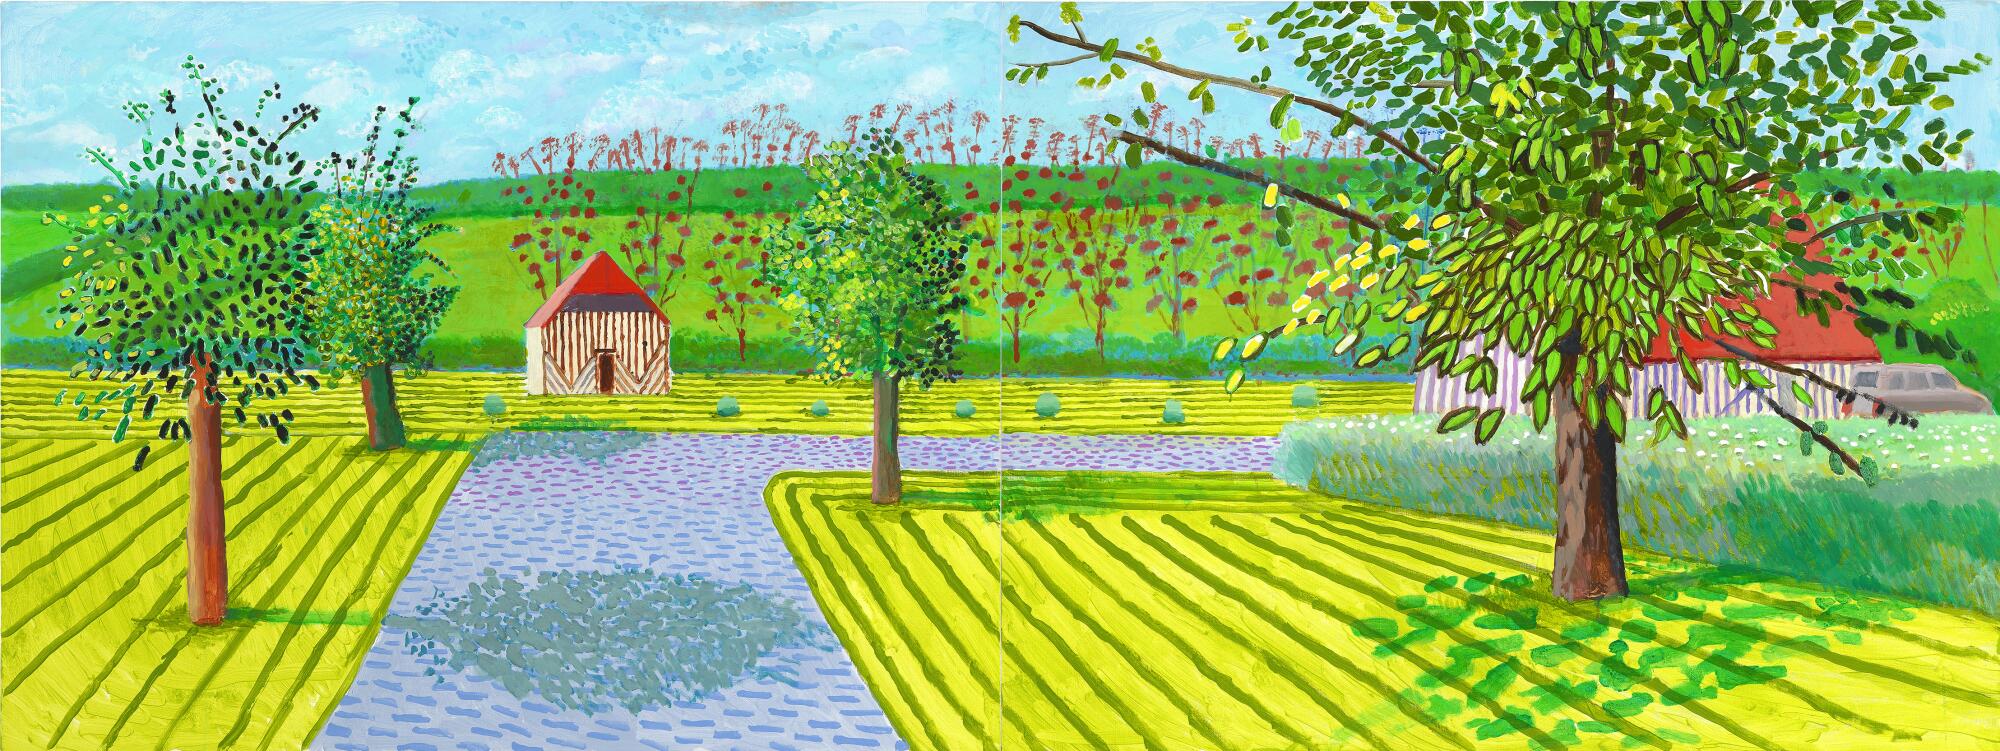 A Hockney work shows a path that takes a right turn, bordered by leafy and flowering trees and outbuildings.